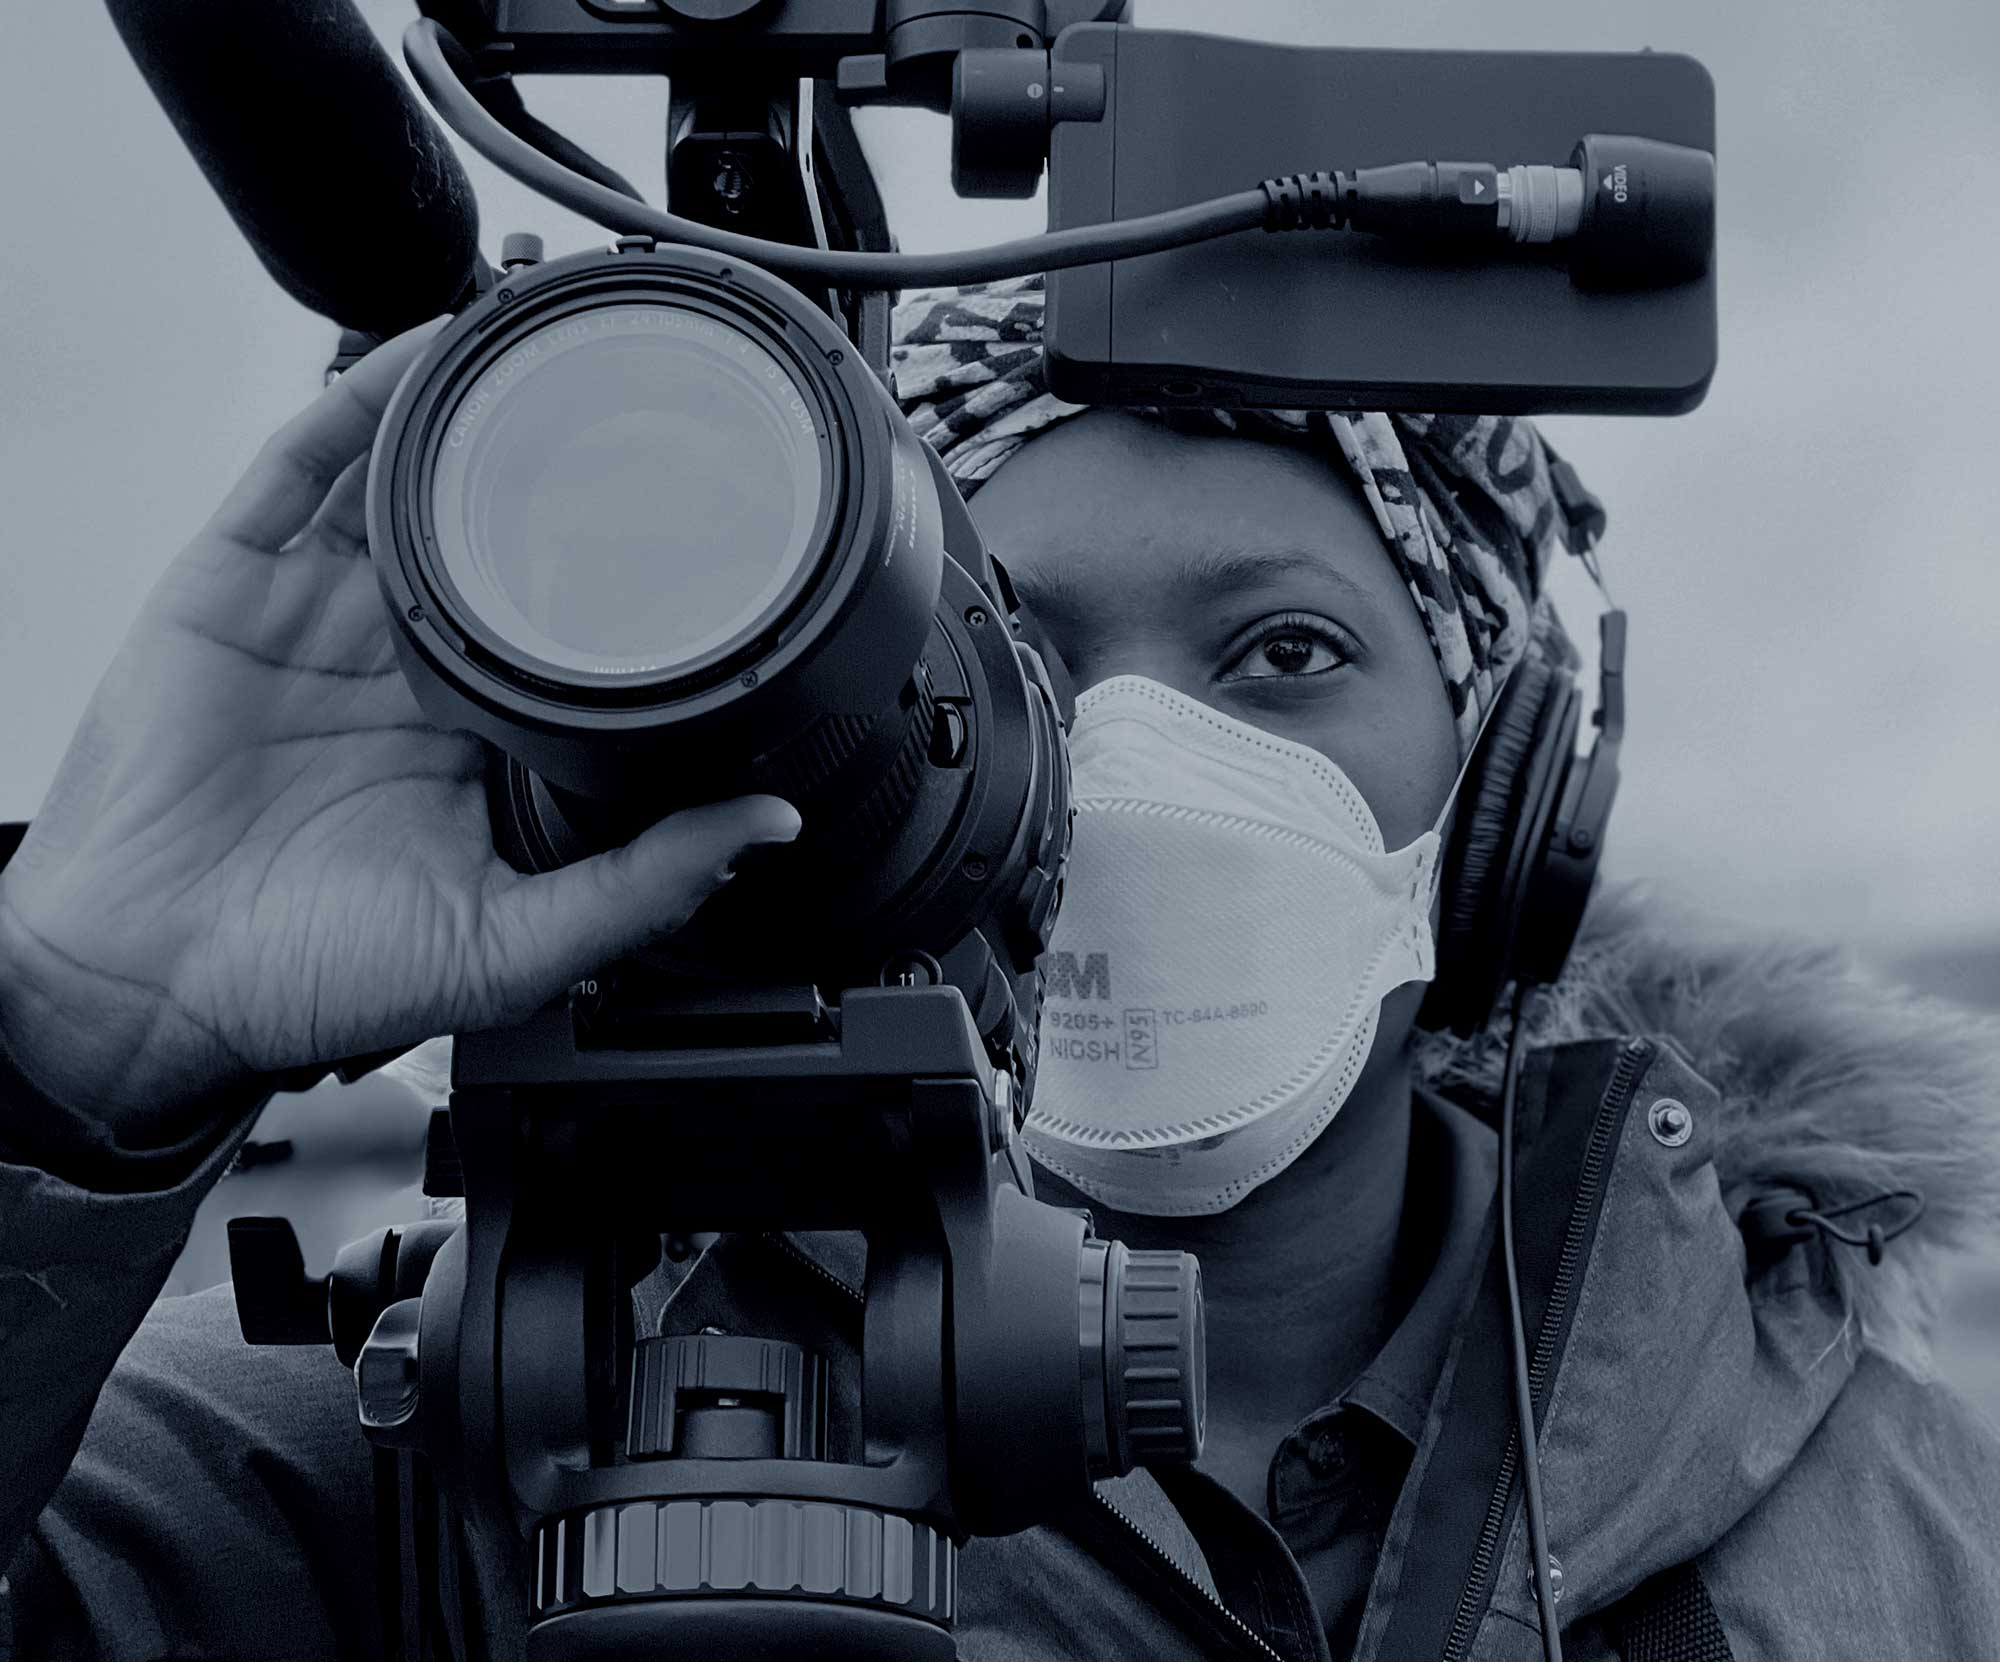 A person wearing a face mask, headphones, and a jacket operates a professional video camera with a large microphone attached. The person appears focused on the task, looking through the camera's viewfinder. The image is in black and white. Black woman journalist focusing a camera